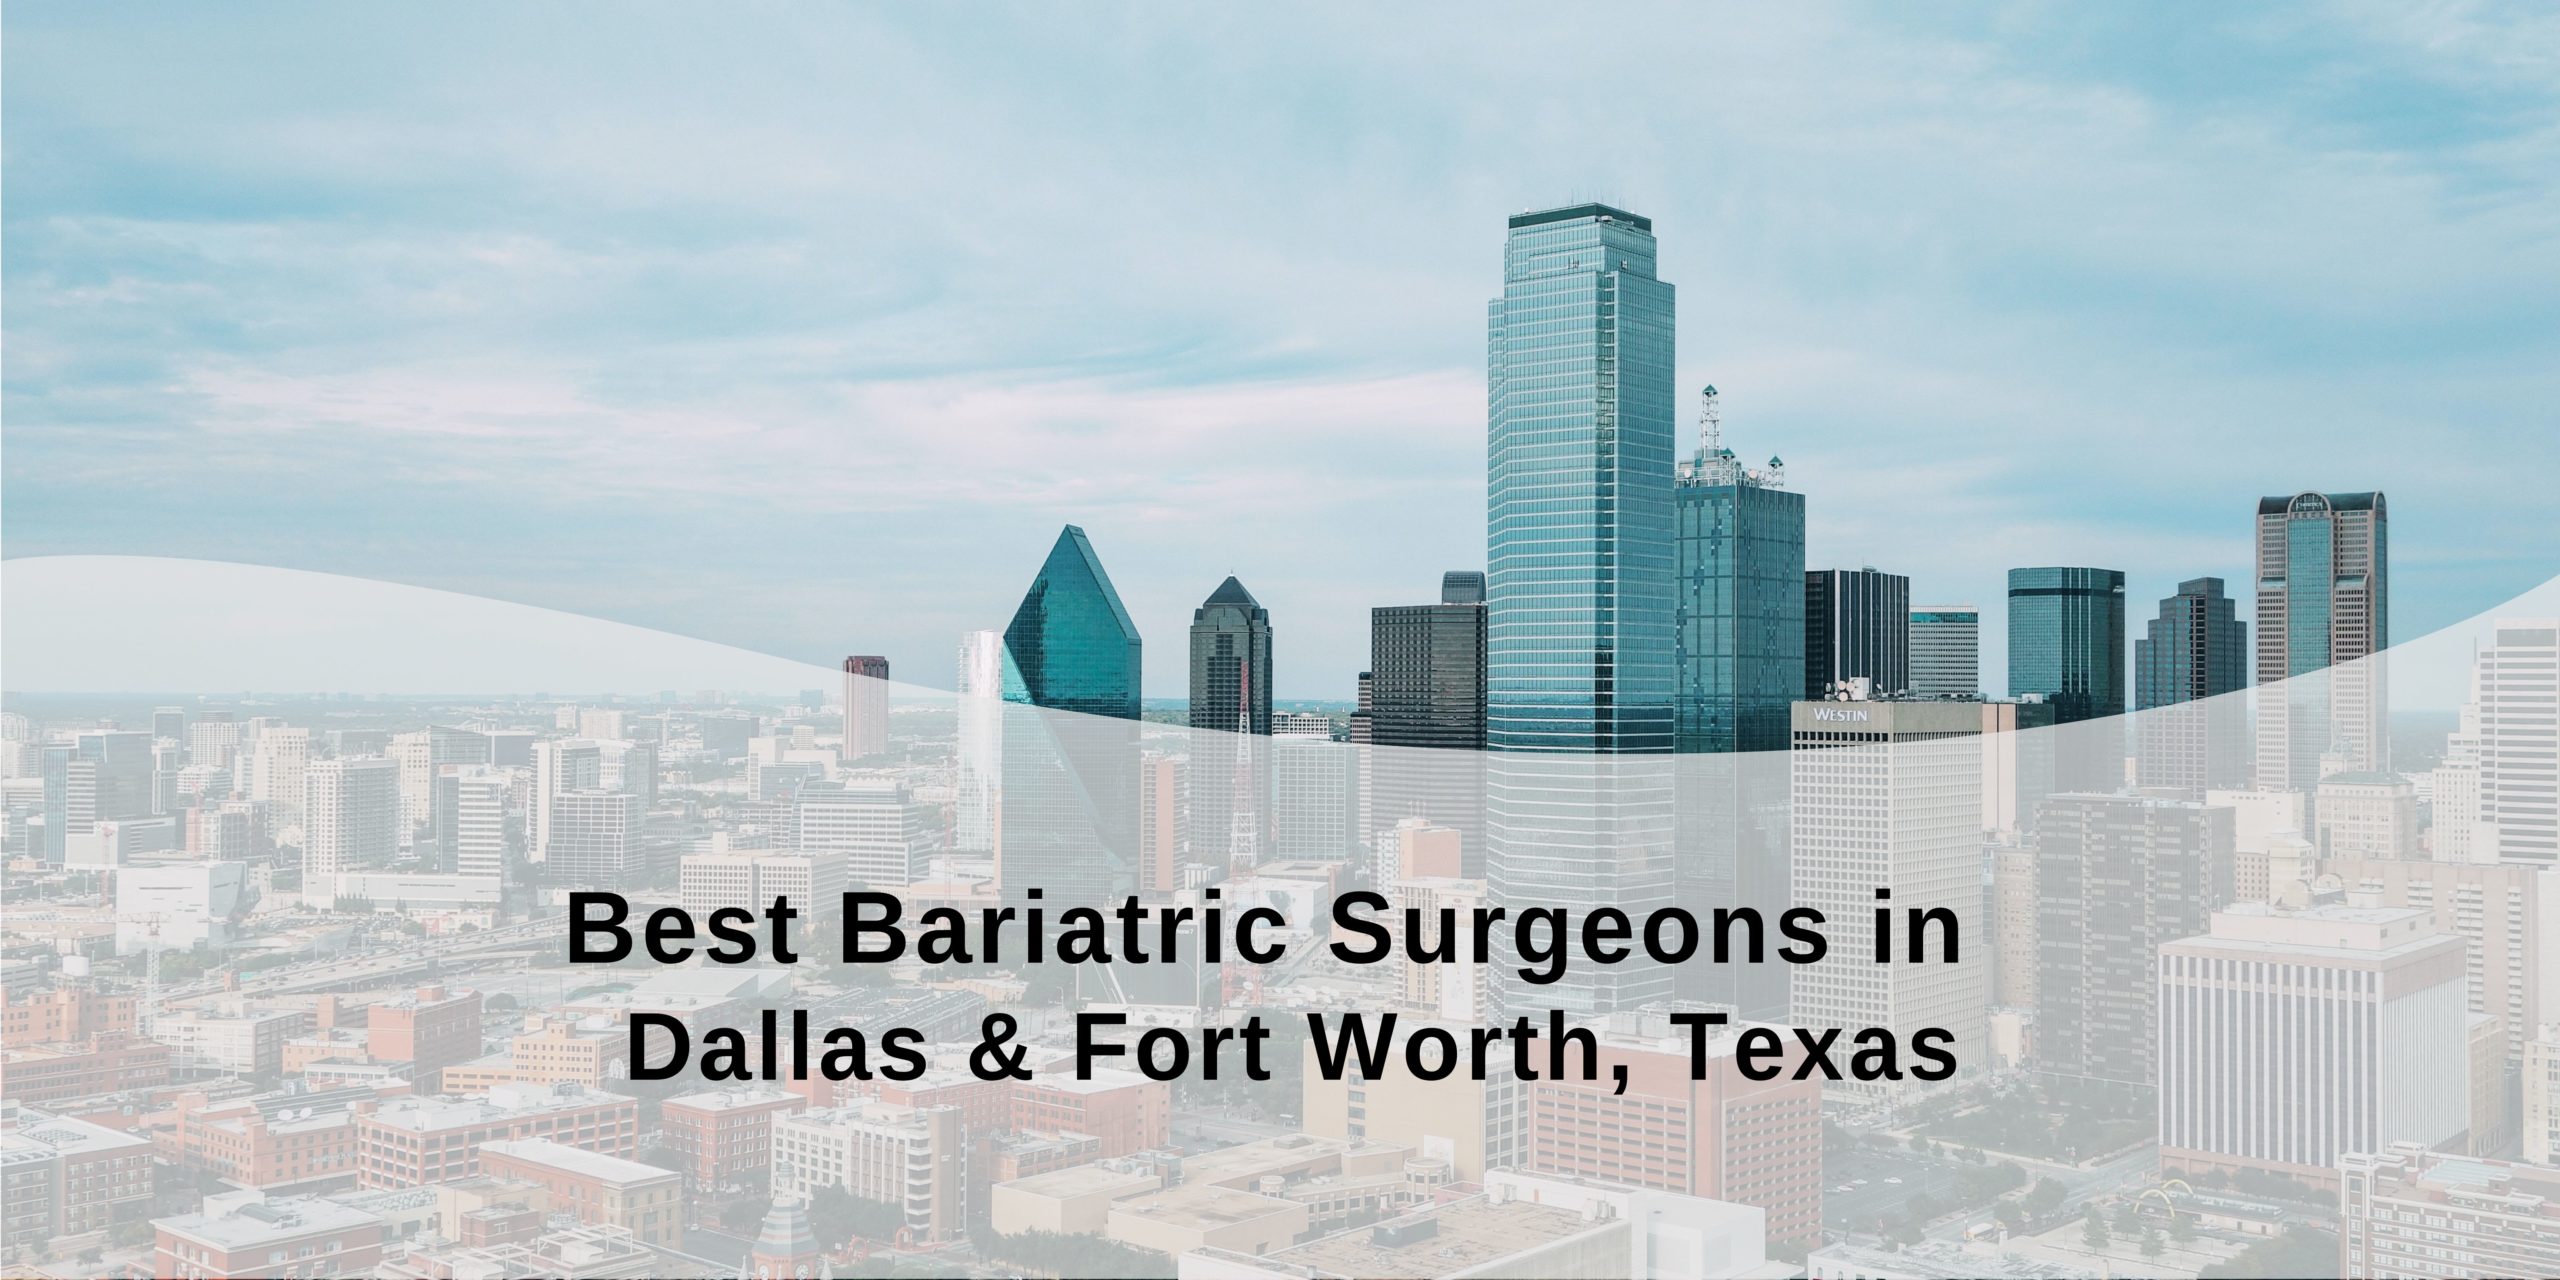 Best Bariatric Surgeons in Dallas & Fort Worth, Texas